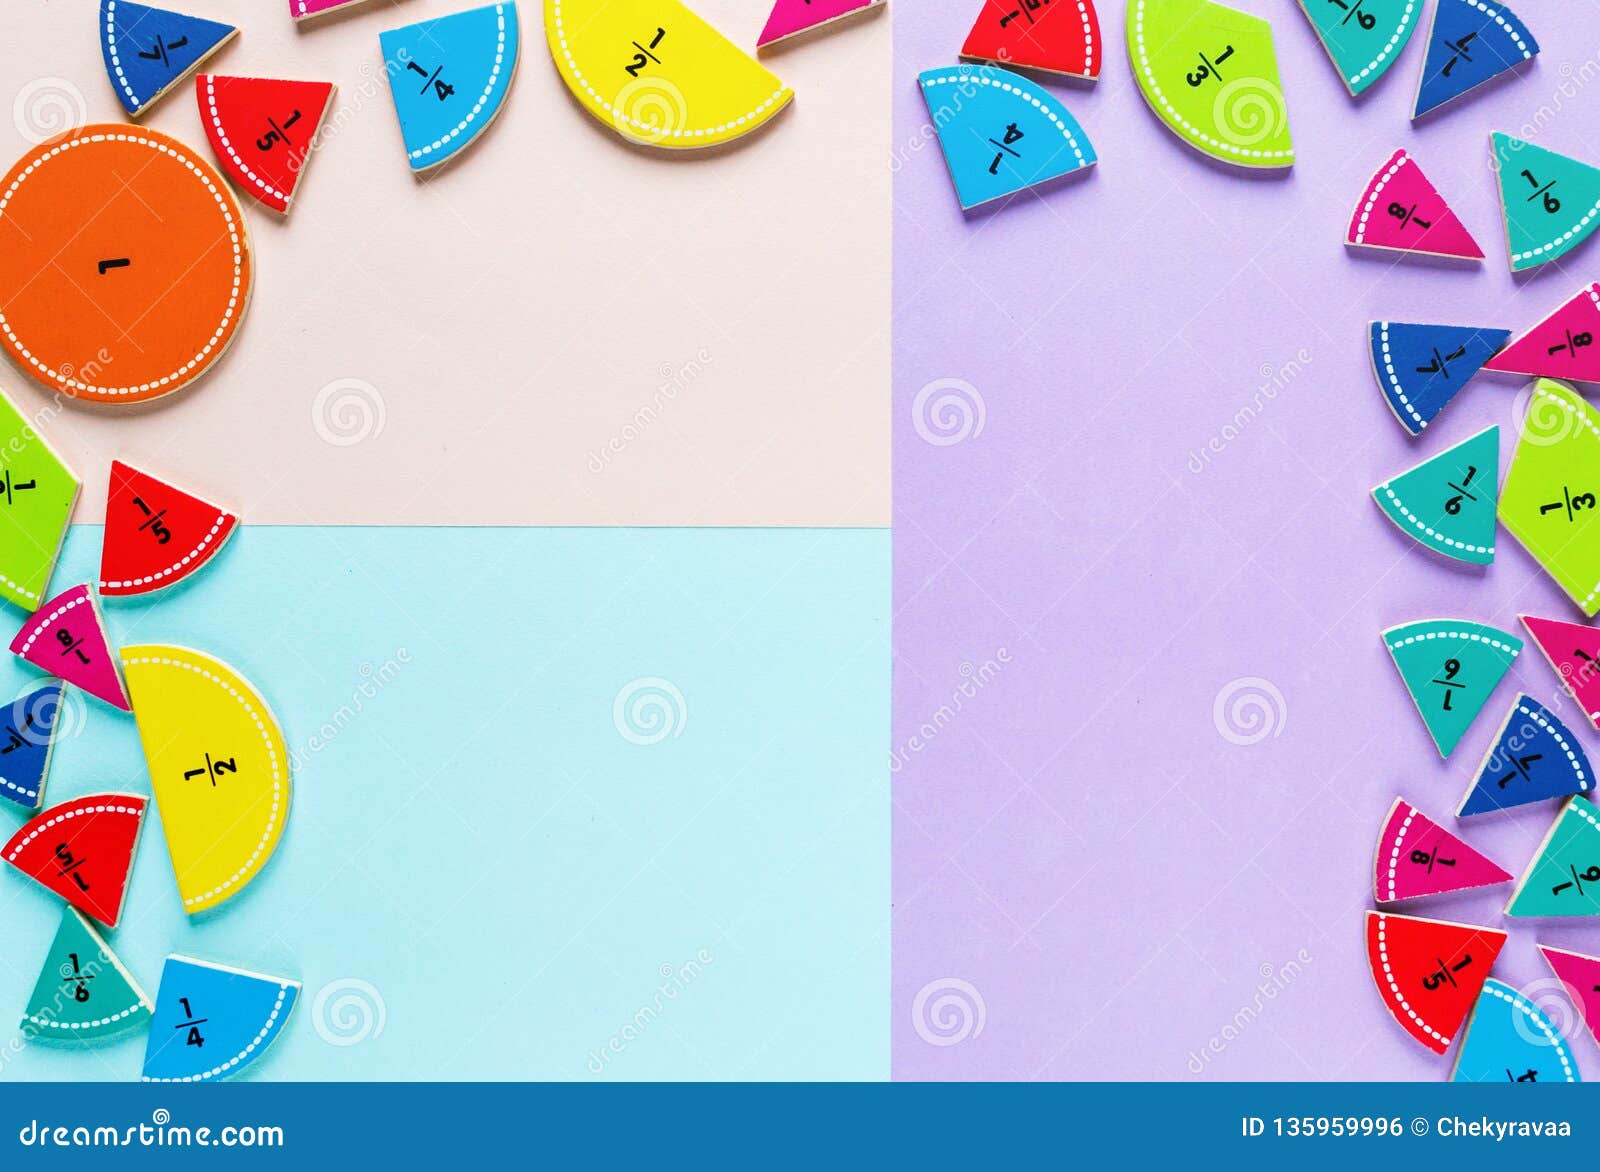 1 086 Mathematics Backgrounds Photos Free Royalty Free Stock Photos From Dreamstime